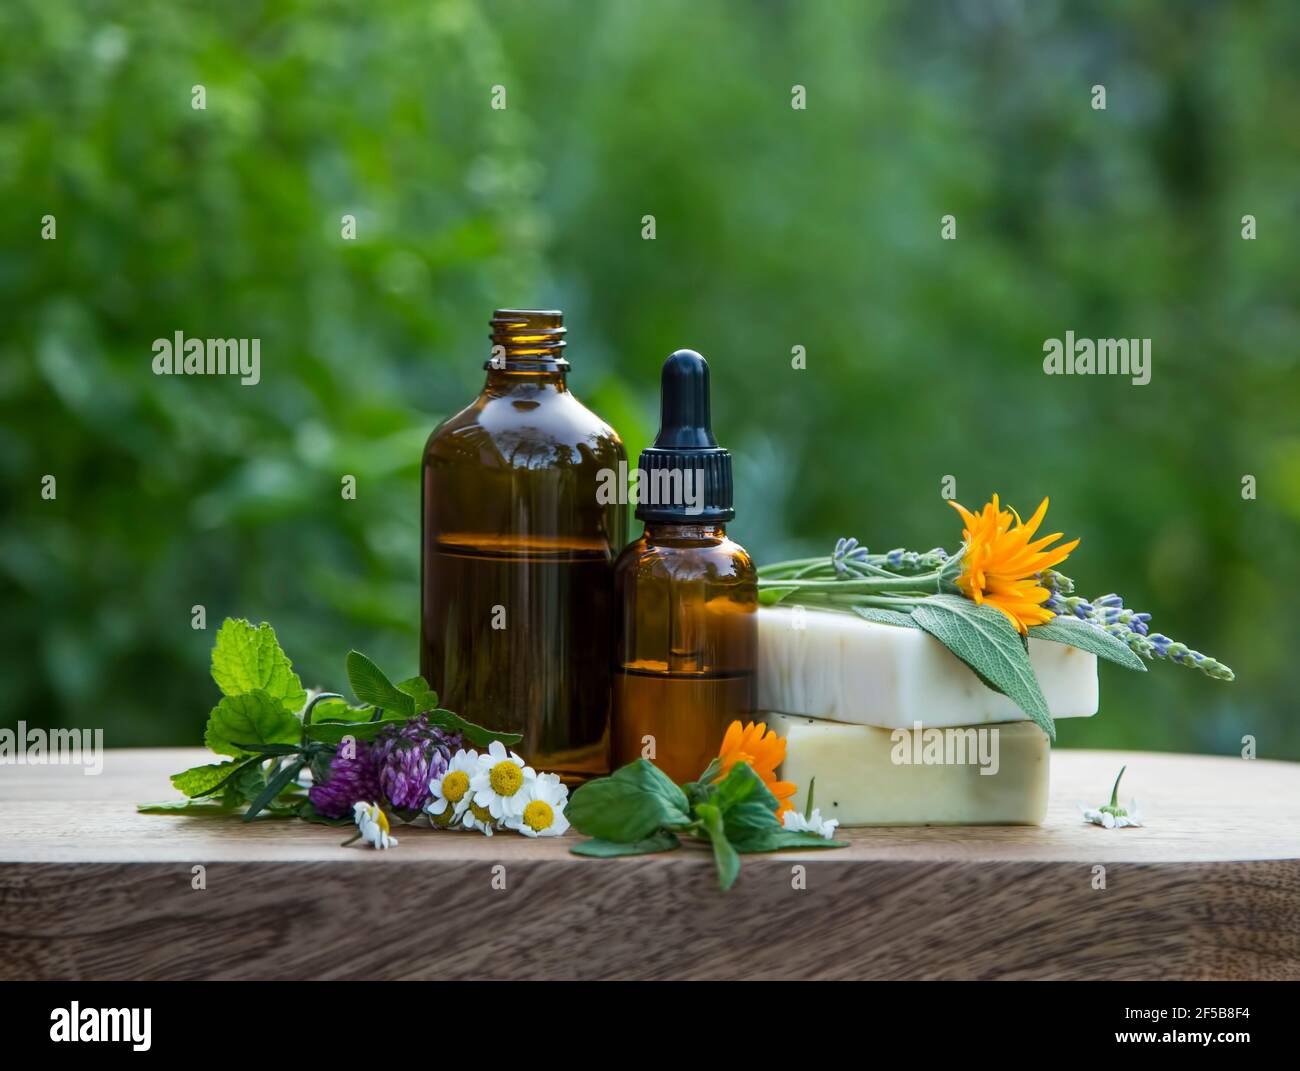 Fresh herbs, oil bottles and natural soap for aromatherapy, massage and spa, medicinal plants and herbs composition outside in the garden, natural spa Stock Photo